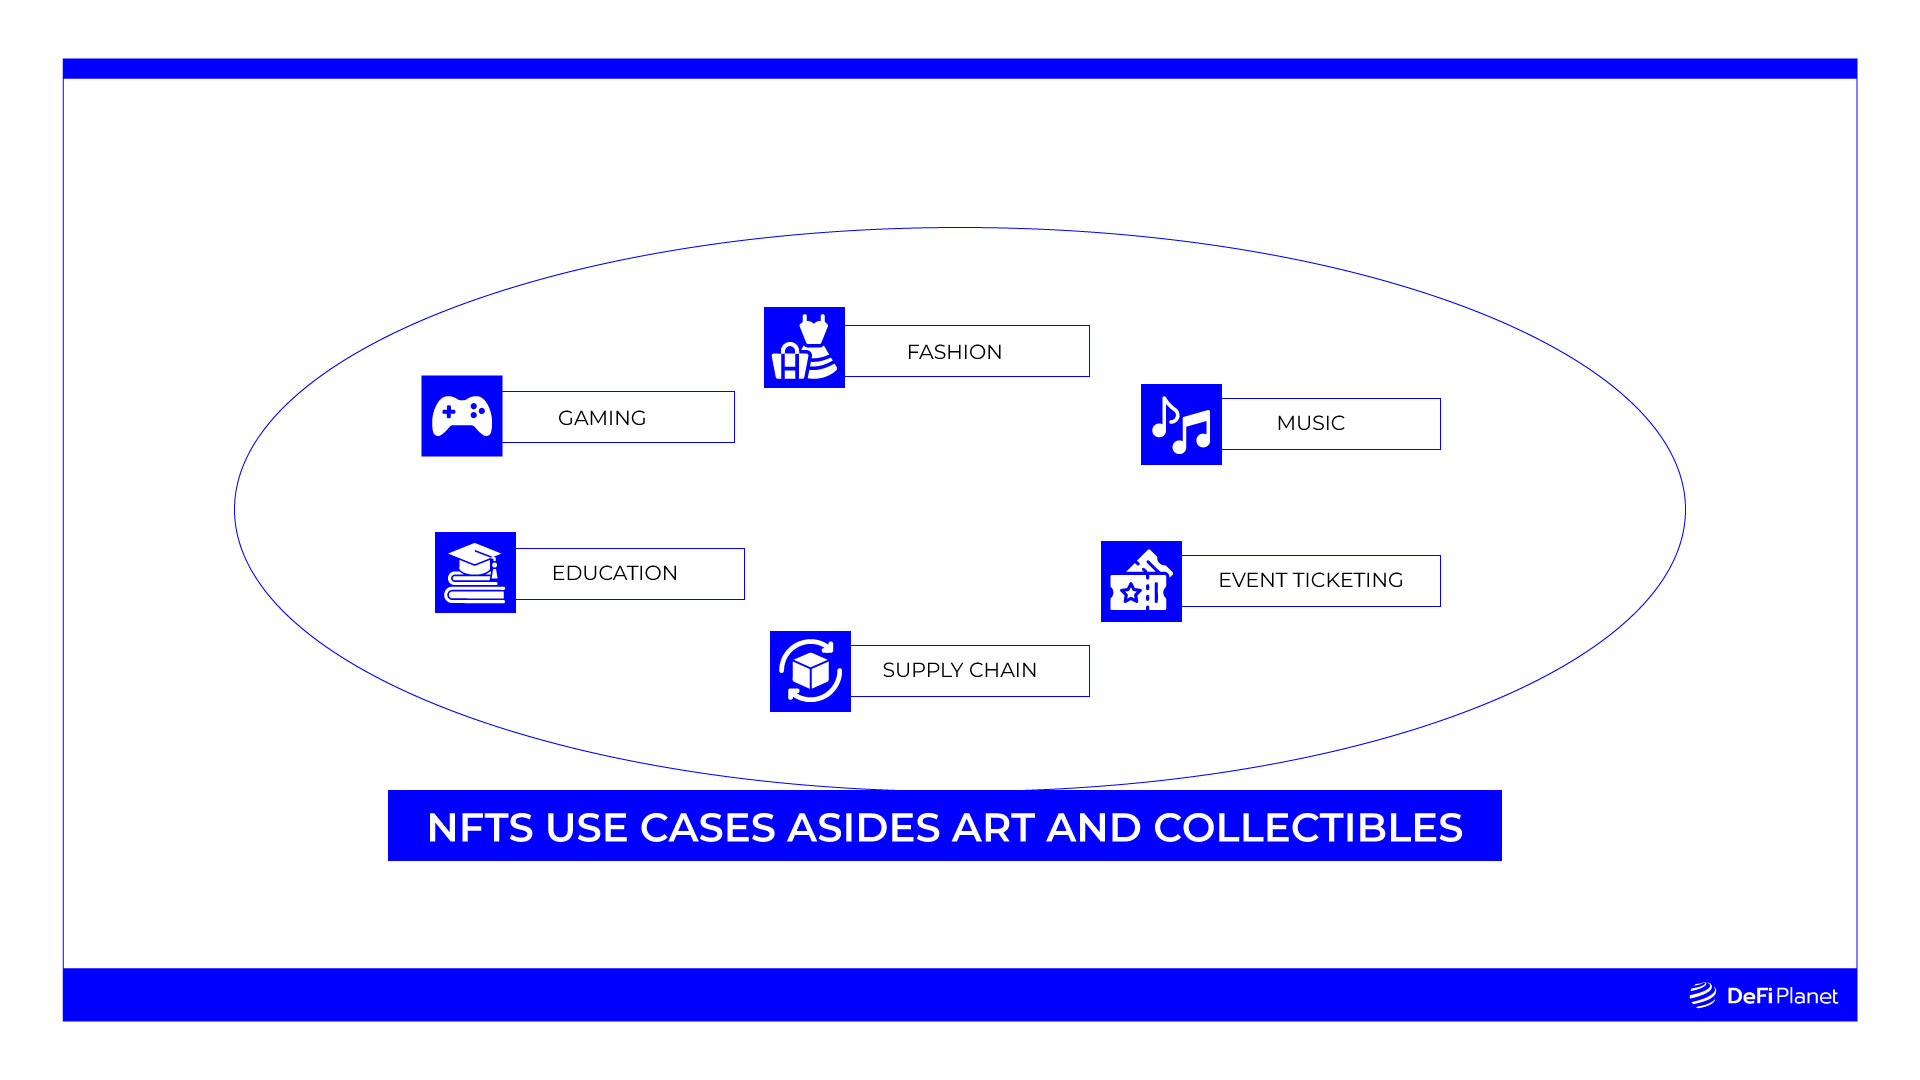 Diagram showing NFTs Be Used Beyond Art and Collectibles on DeFi Planet